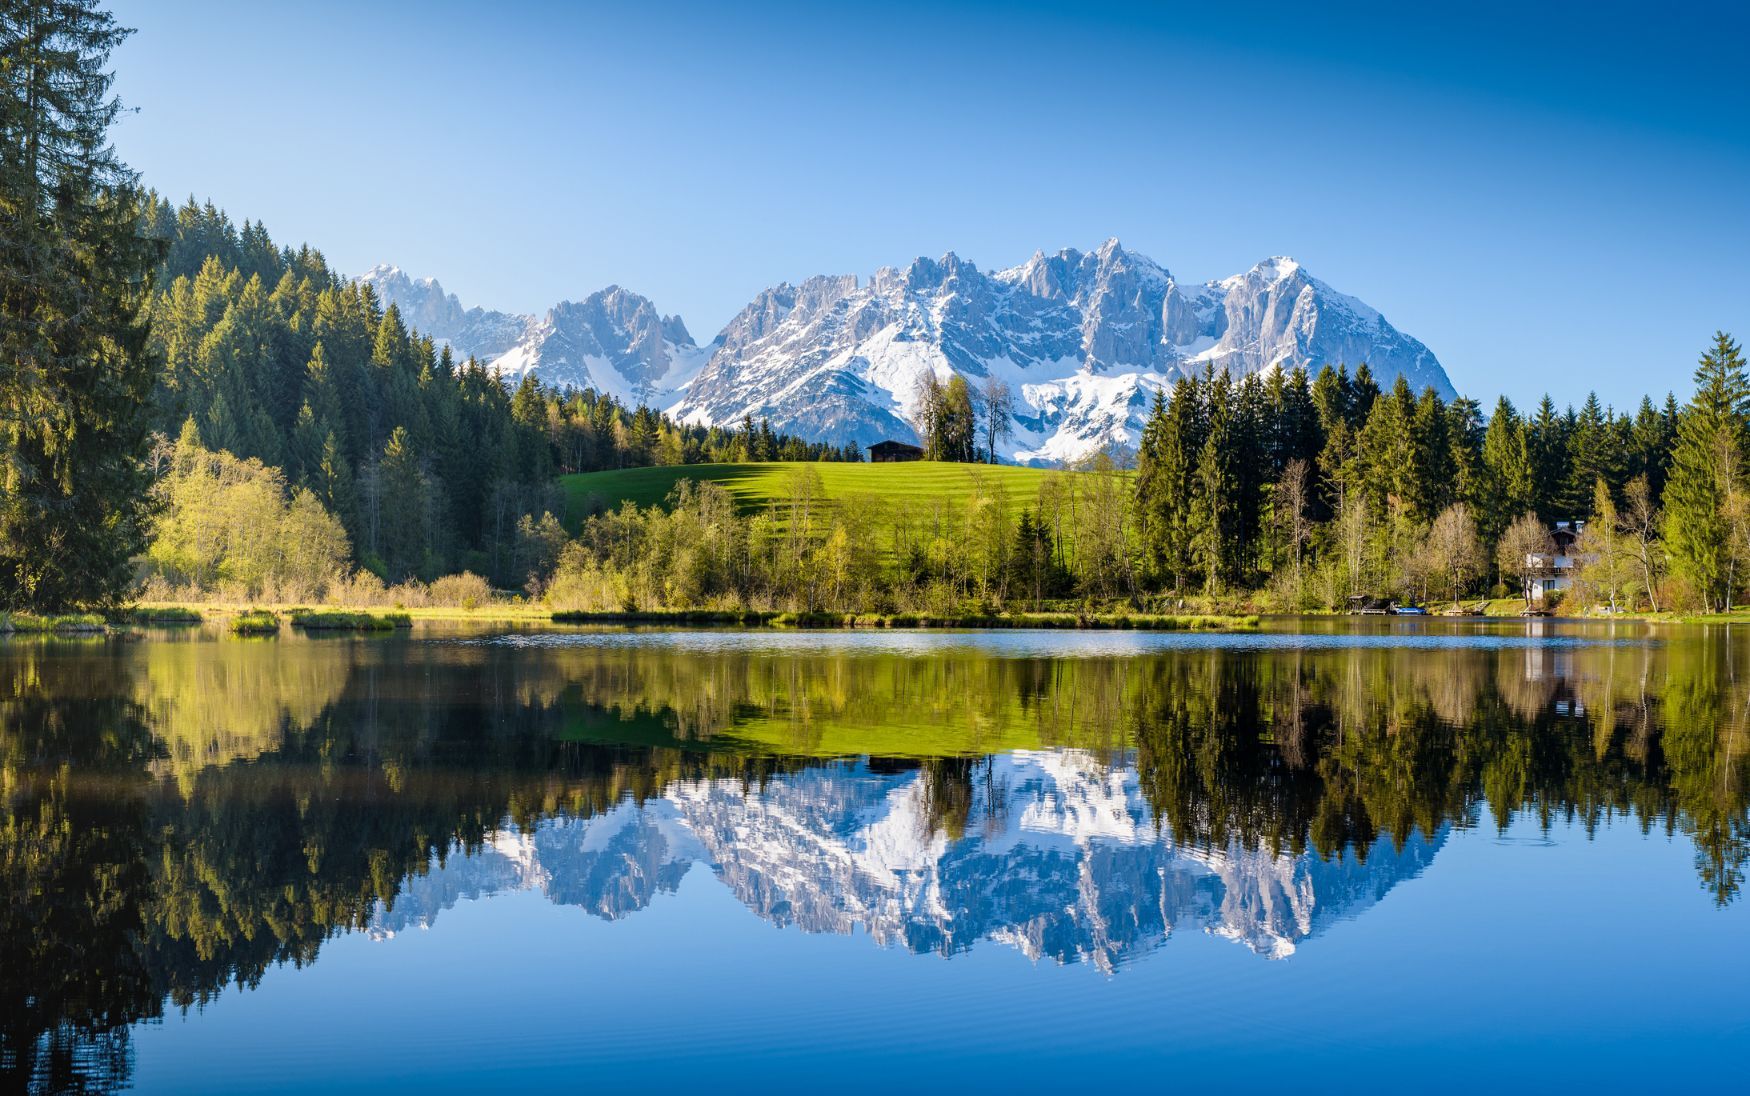 The Wilder Kaiser mountains reflected in a lake.